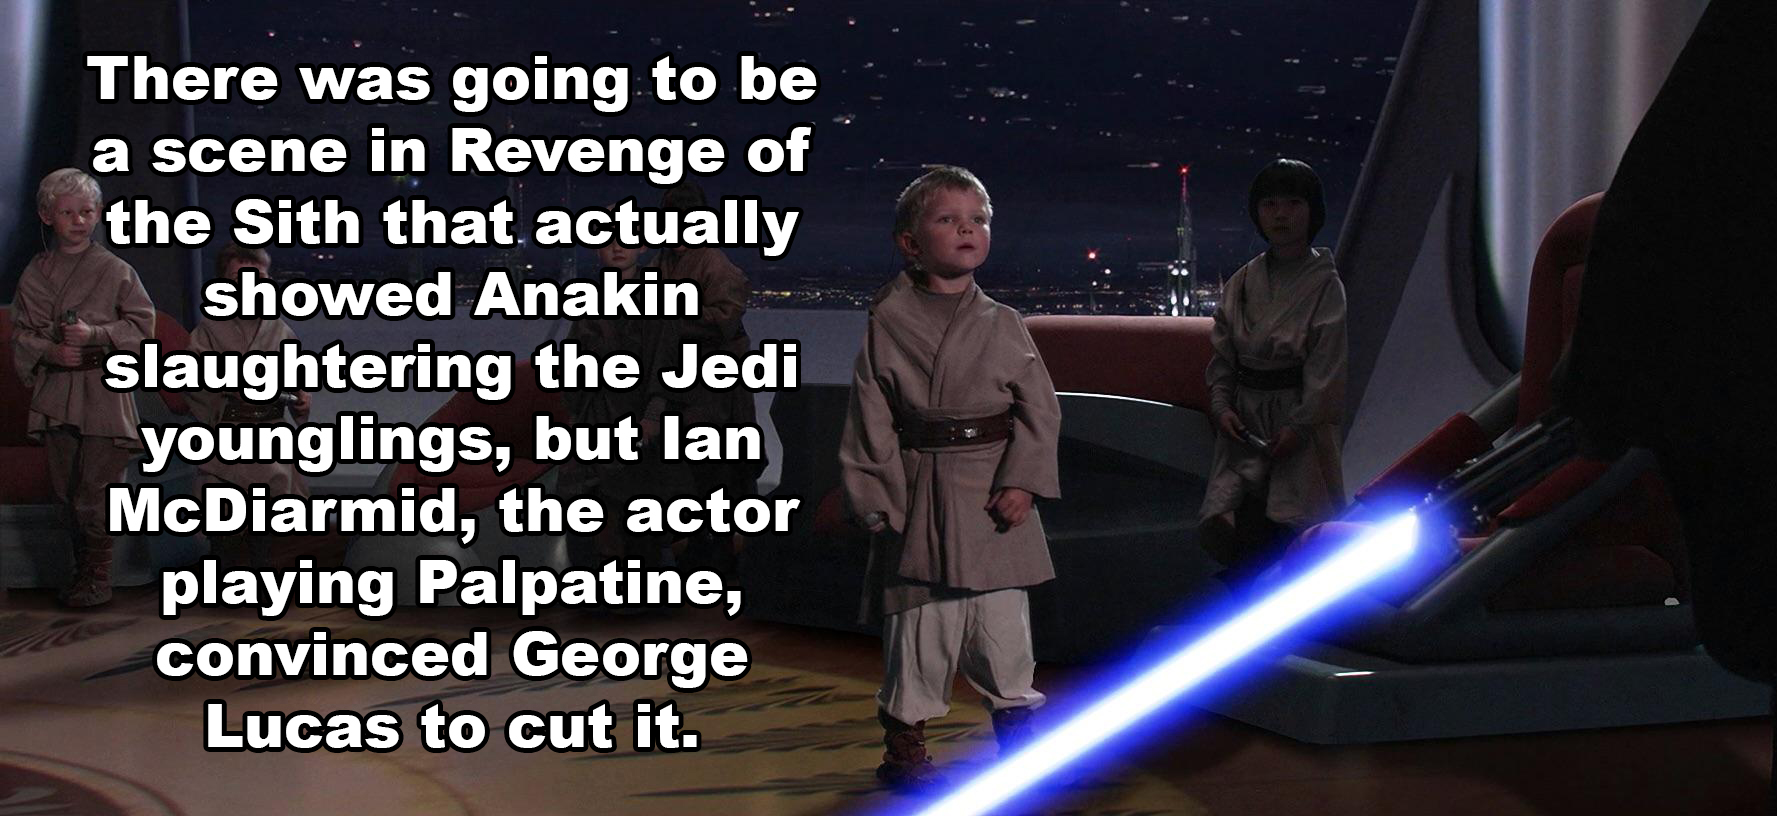 anakin kills kids - There was going to be a scene in Revenge of the Sith that actually showed Anakin slaughtering the Jedi younglings, but lan McDiarmid, the actor playing Palpatine, convinced George Lucas to cut it.